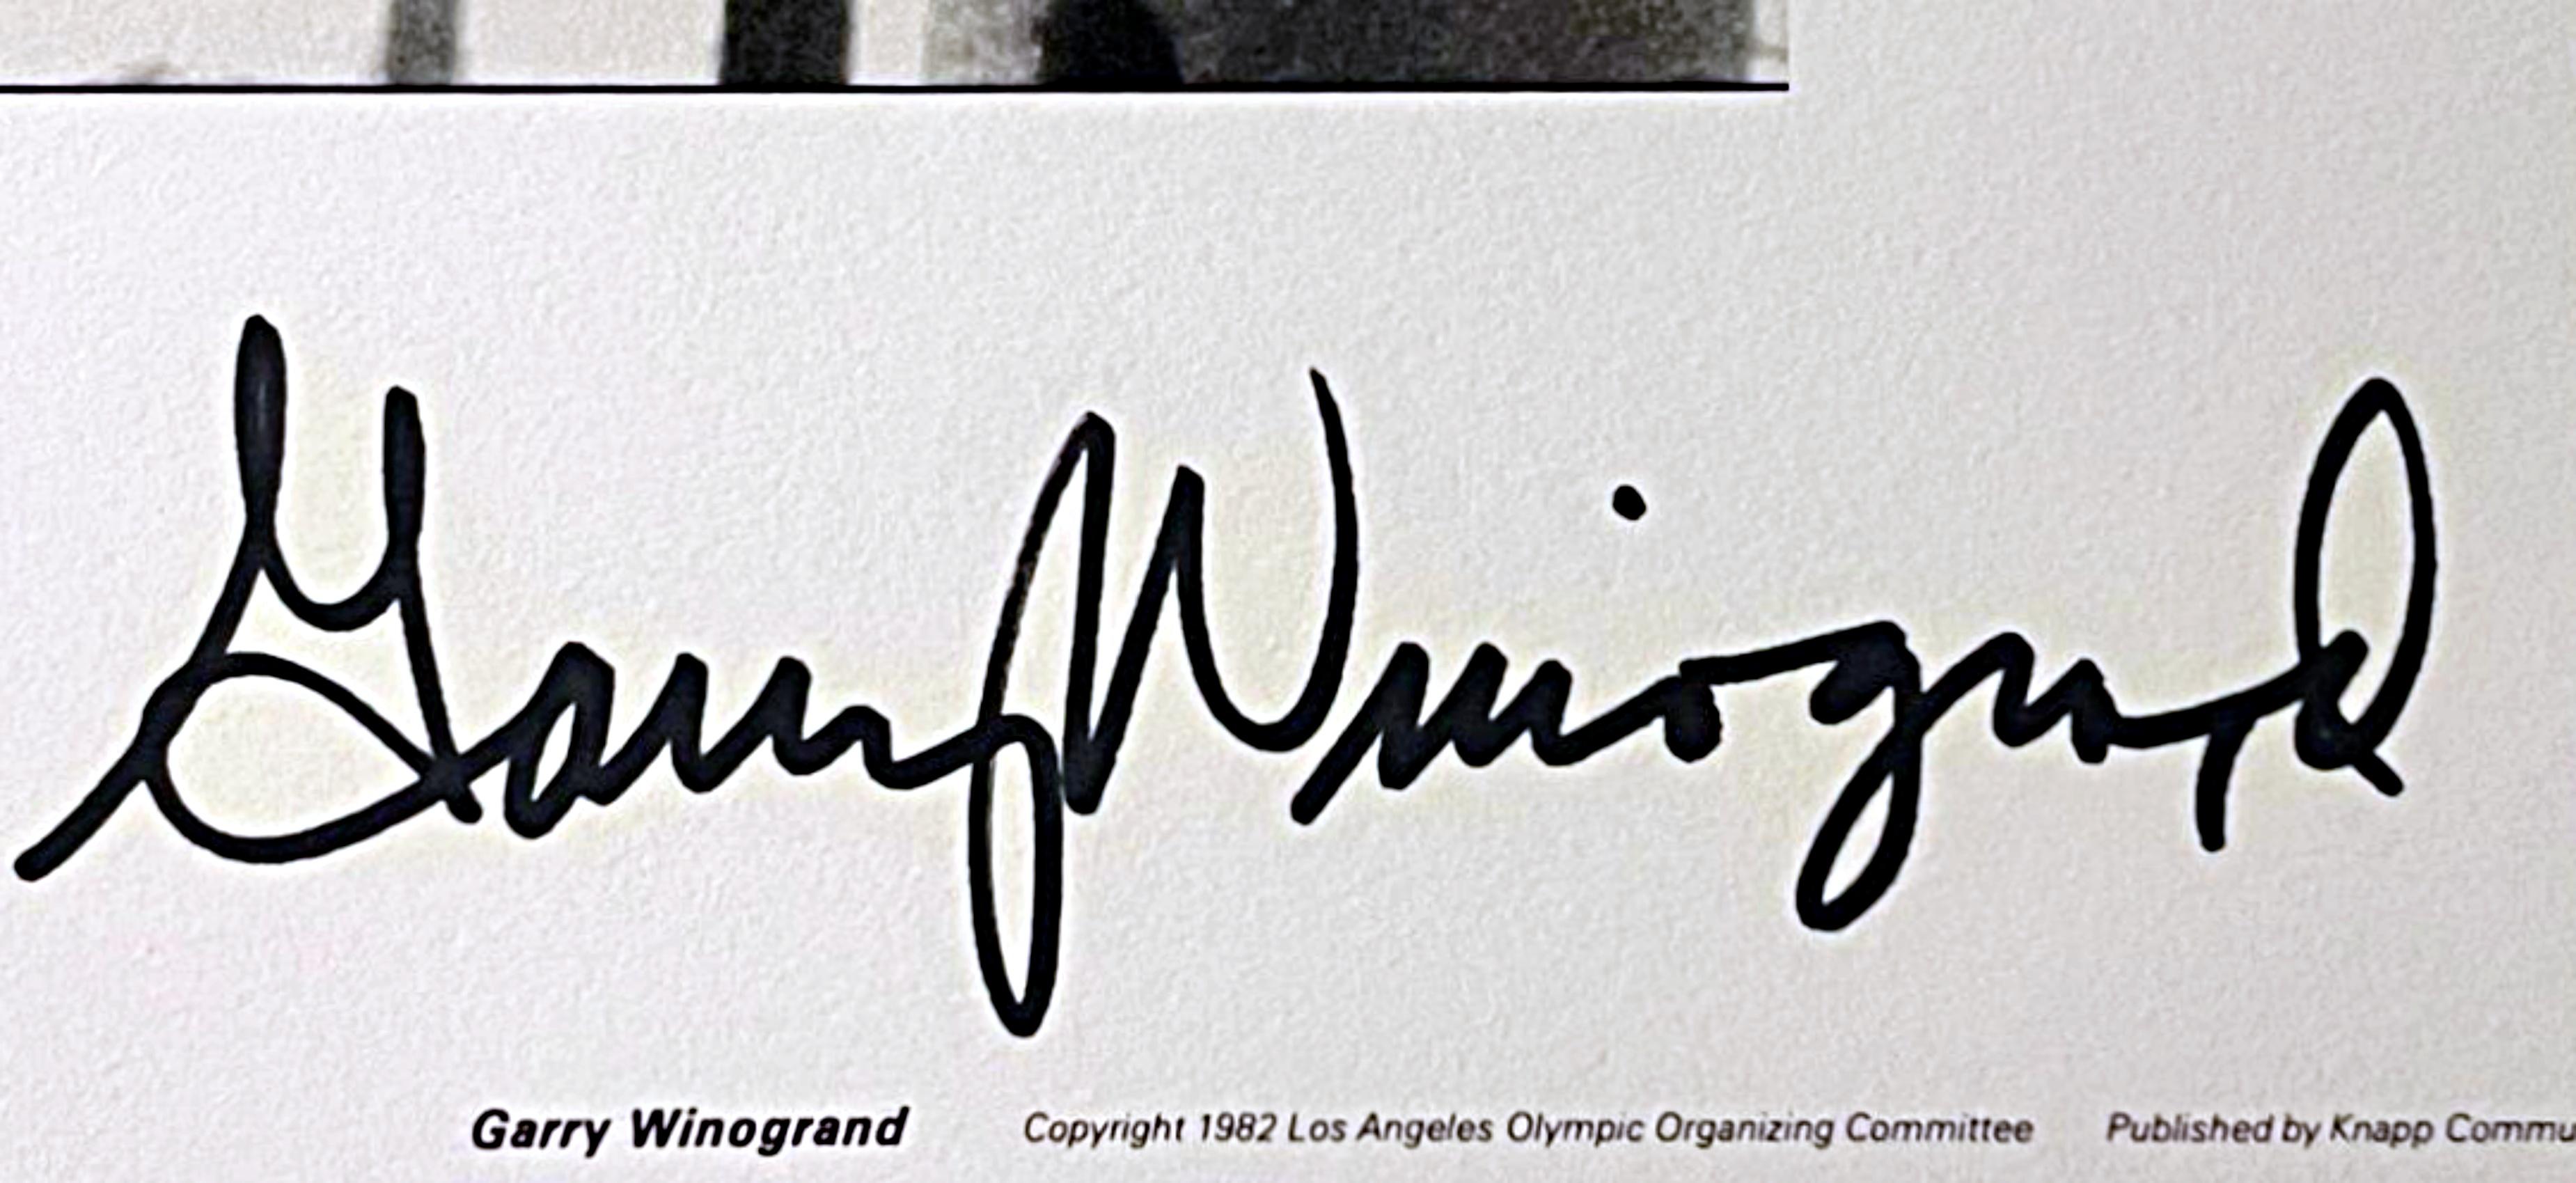 Portrait of Bob Pettis, SIGNED Lt. Ed with COA from publisher, Olympic Committee - Print by Garry Winogrand